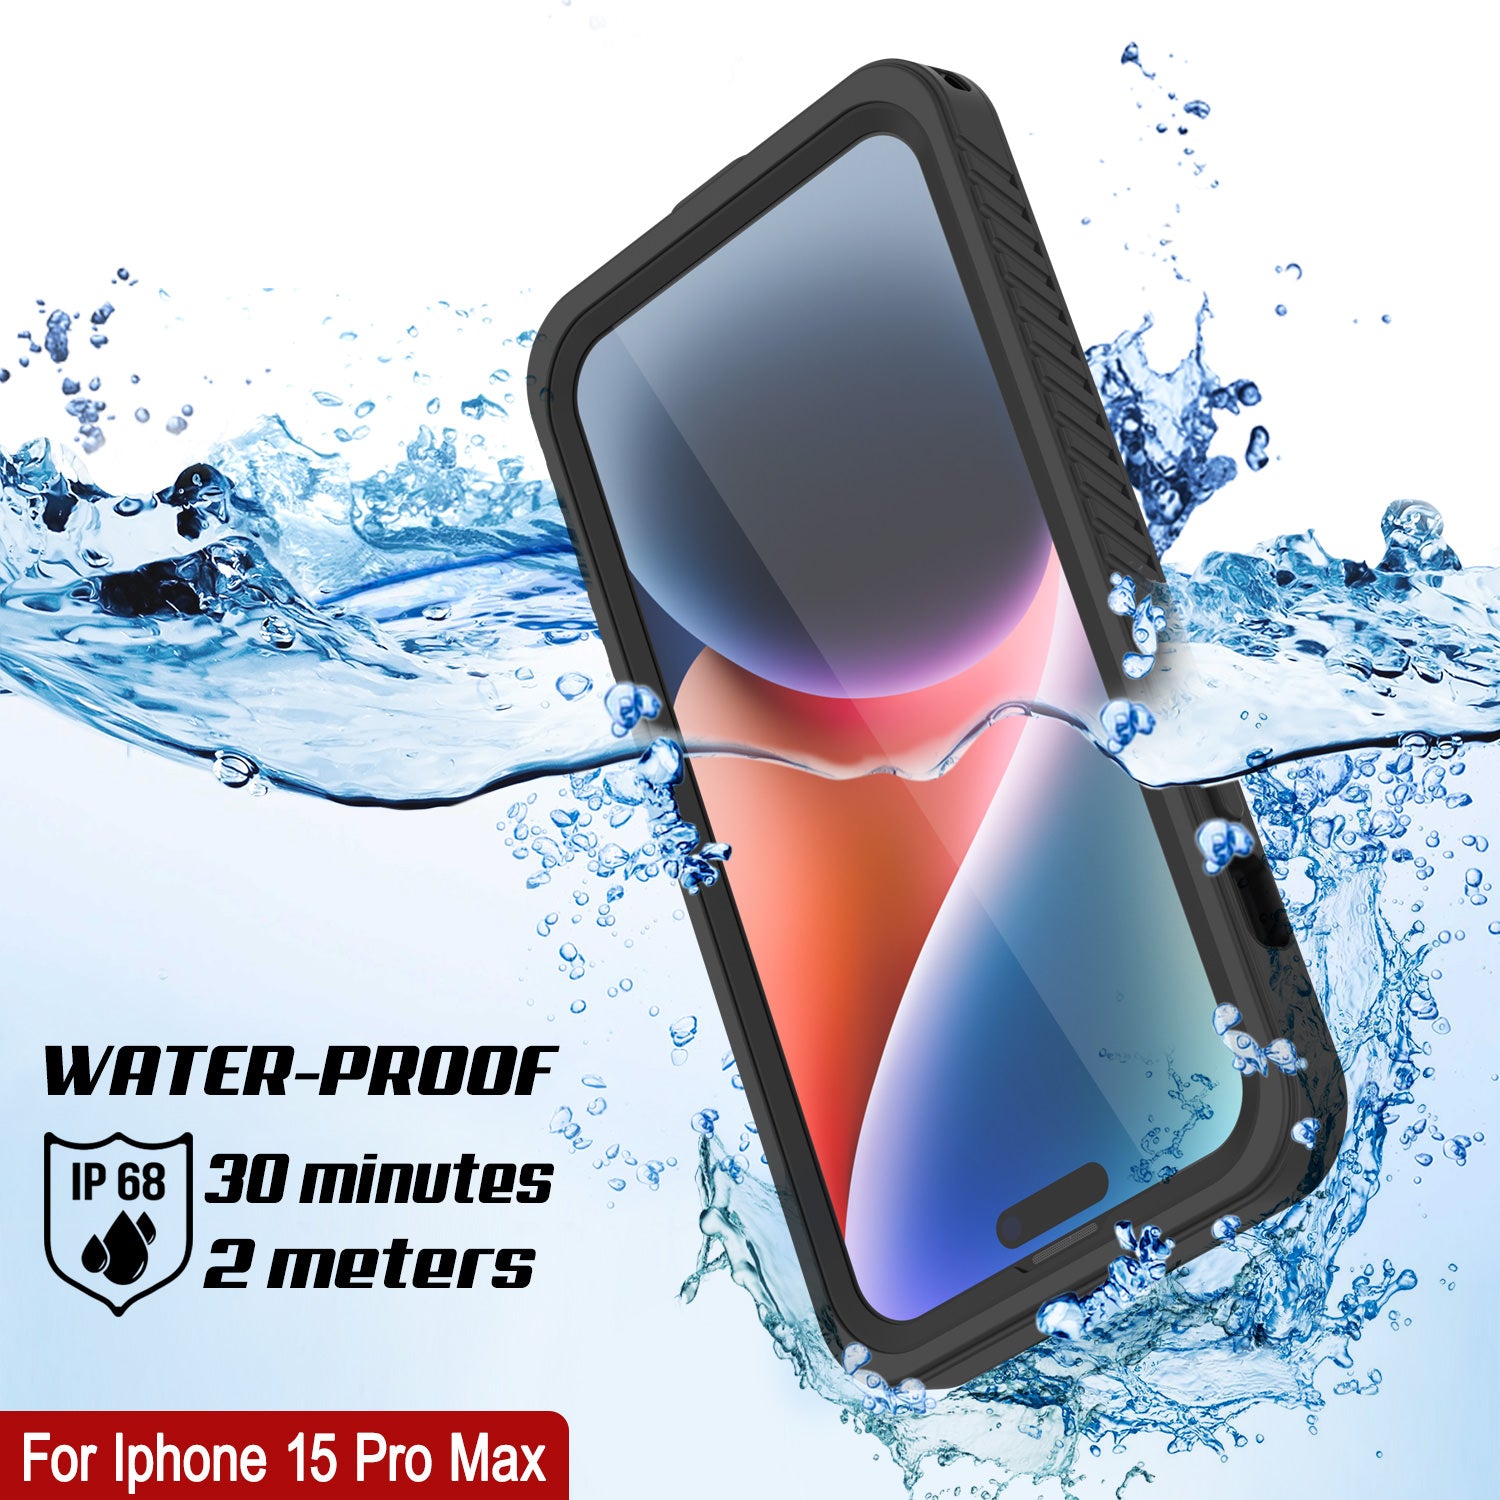 iPhone 15 Pro Max Waterproof Case, Punkcase [Extreme Series] Armor